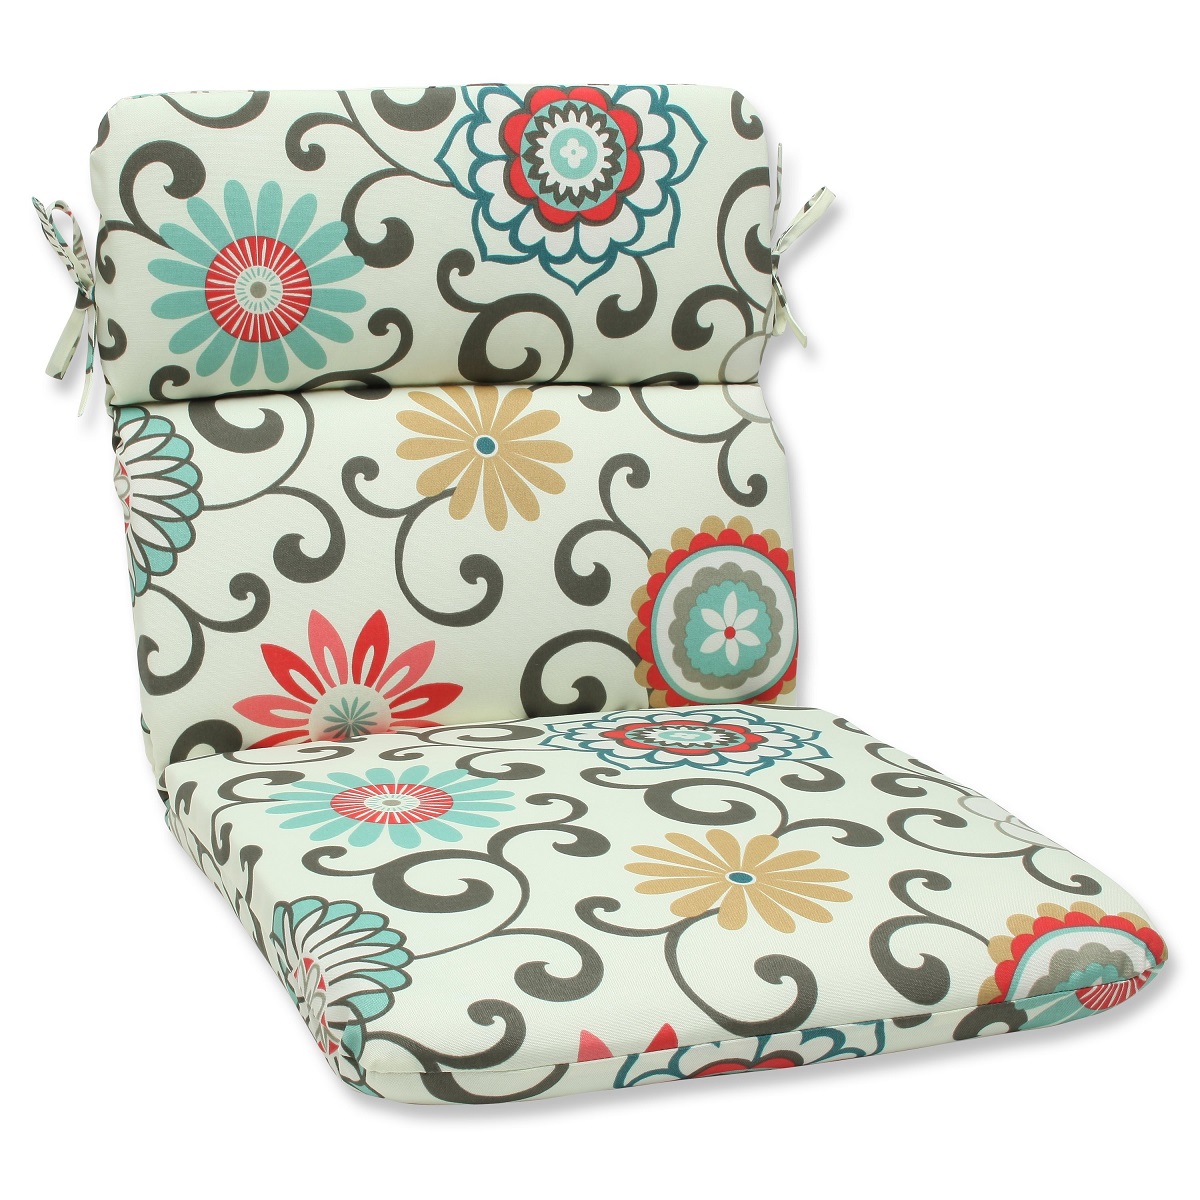 Pillow Perfect 40.5" Brown and White Floral Outdoor Patio Rounded Chair Cushion